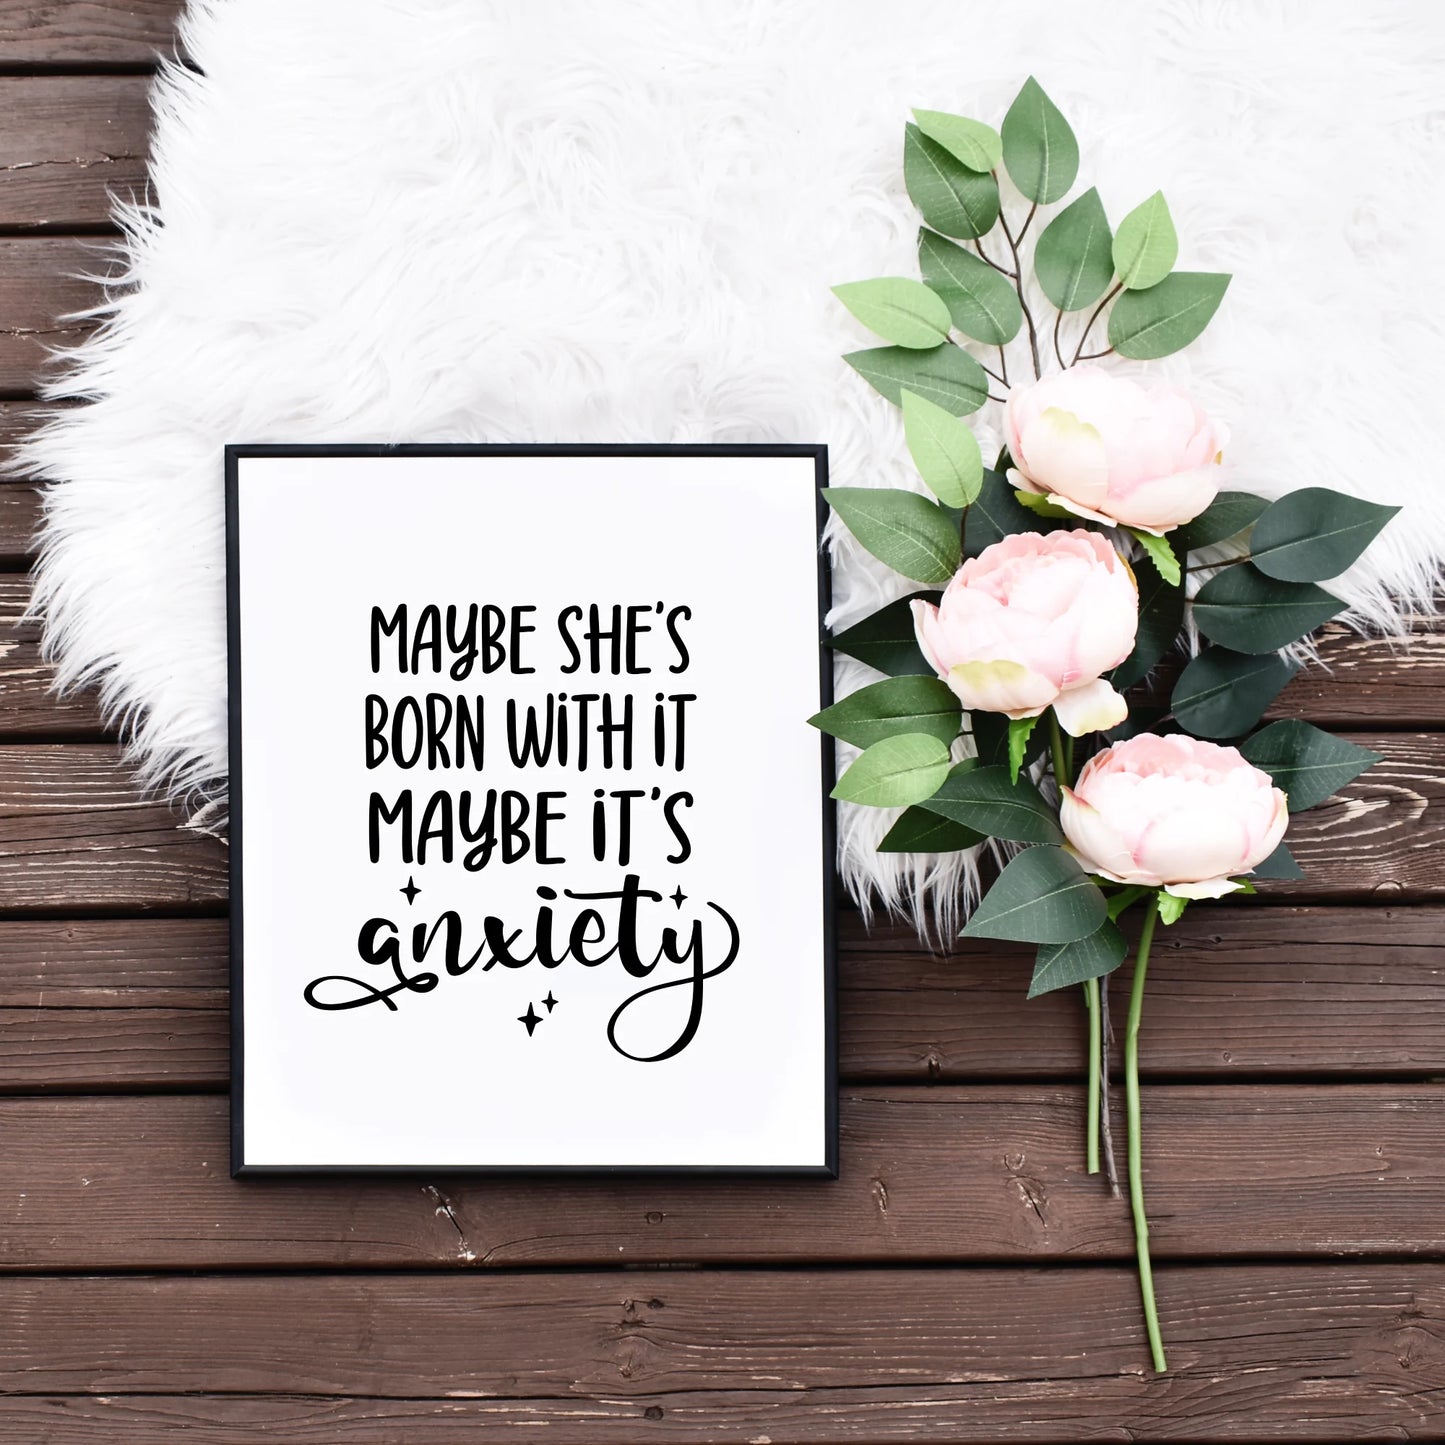 Maybe Shes Born With It Maybe Its Anxiety Quotes about Anxiety Printable Wall Art